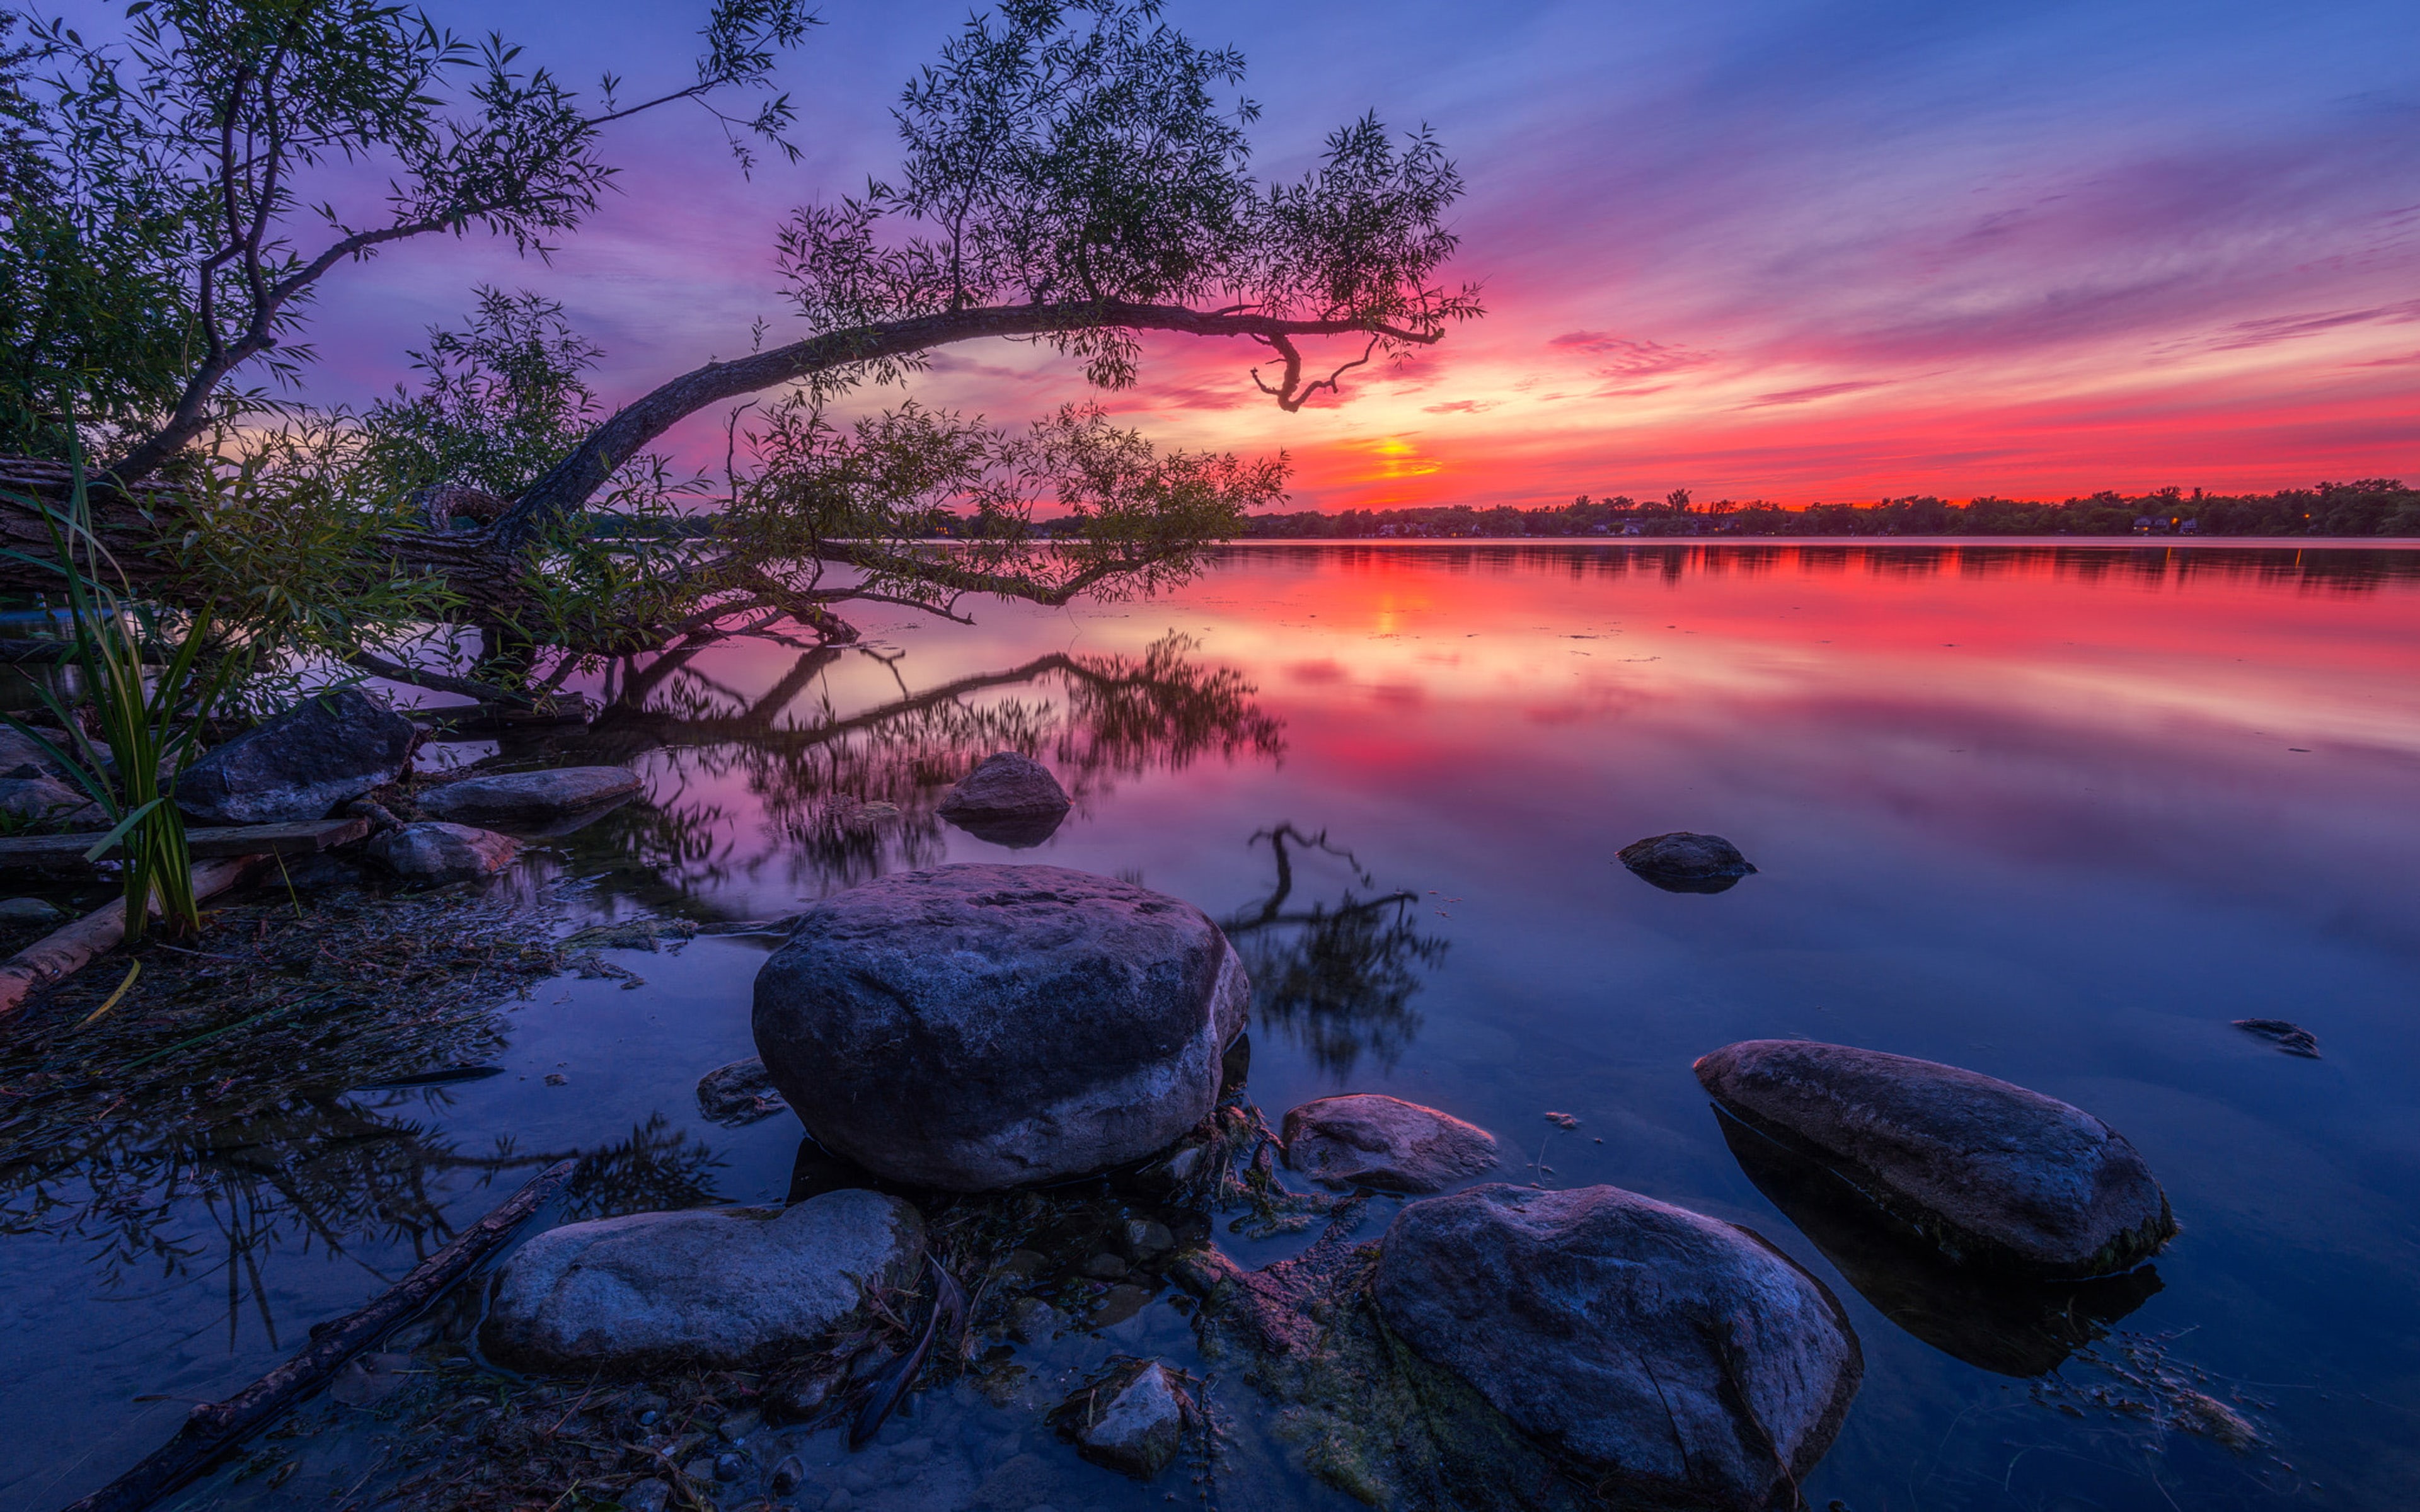 Wallpaper / lake, sunset, wilcox, wallpaper, water, computers, wood, ontario, dusk, hd, 4K, reflection, red, desktop, mobile, willow, phones, stone, tablet, canada free download